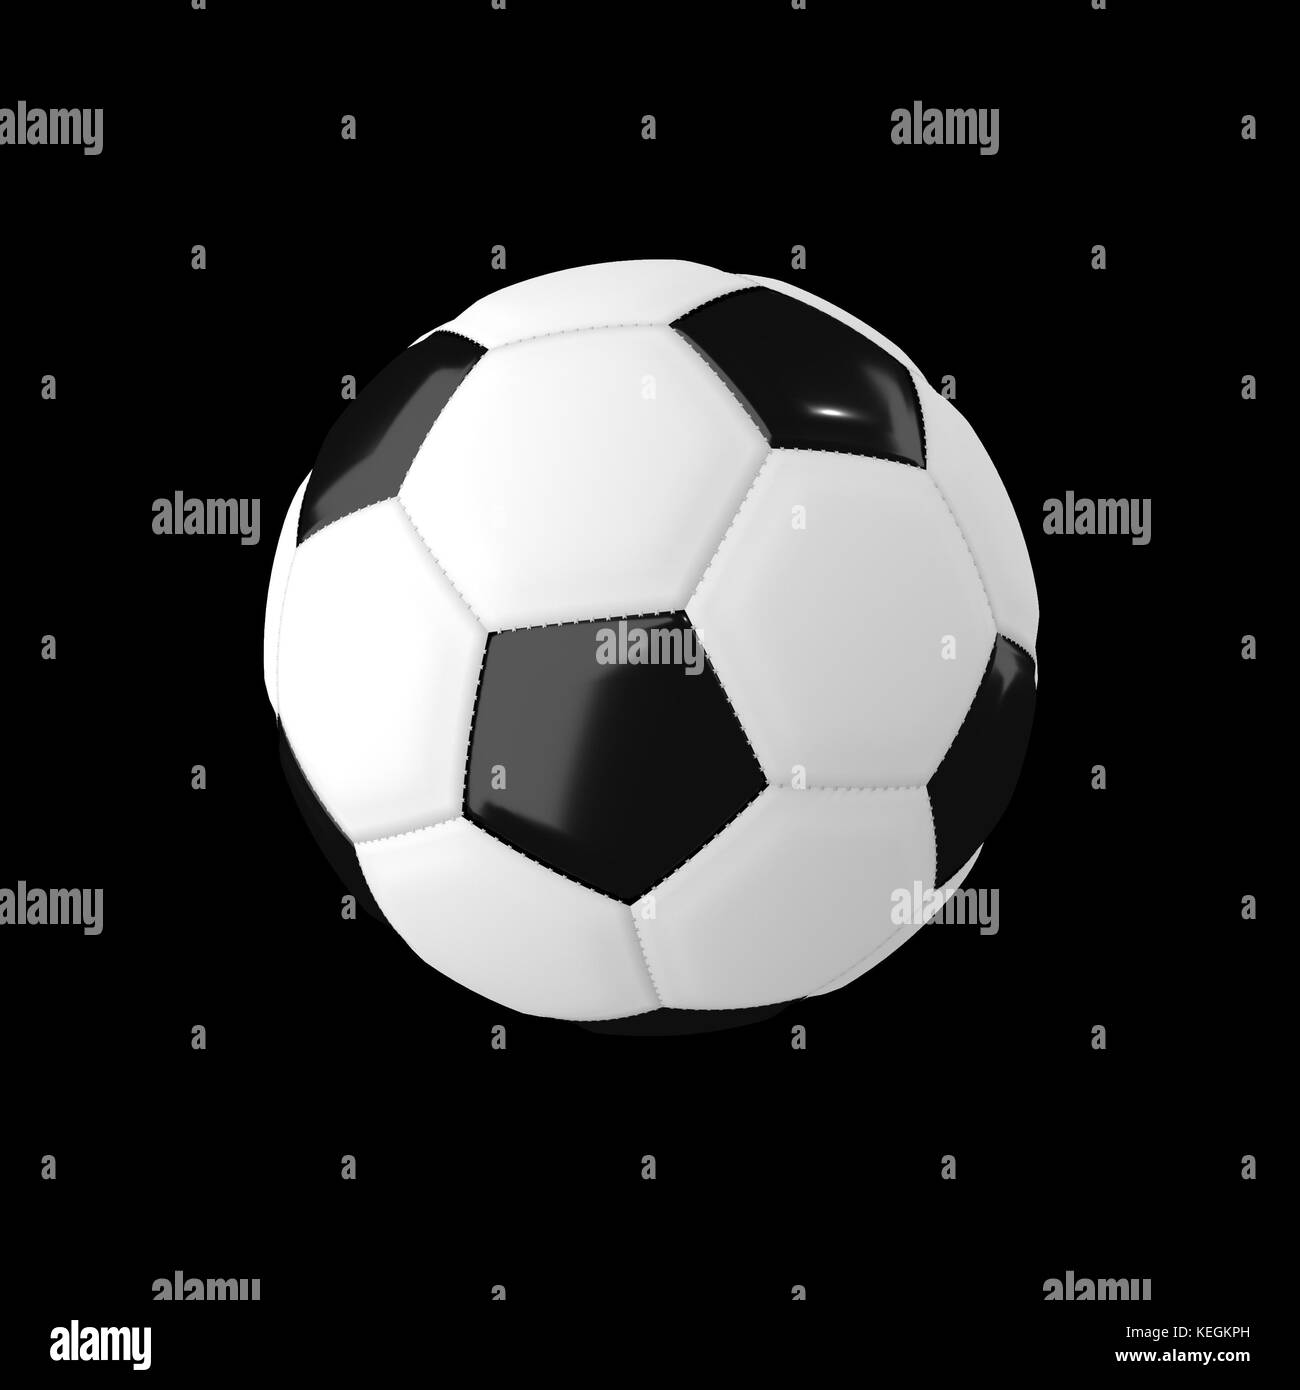 realistic football or soccer on black background in 3D rendering Stock Photo